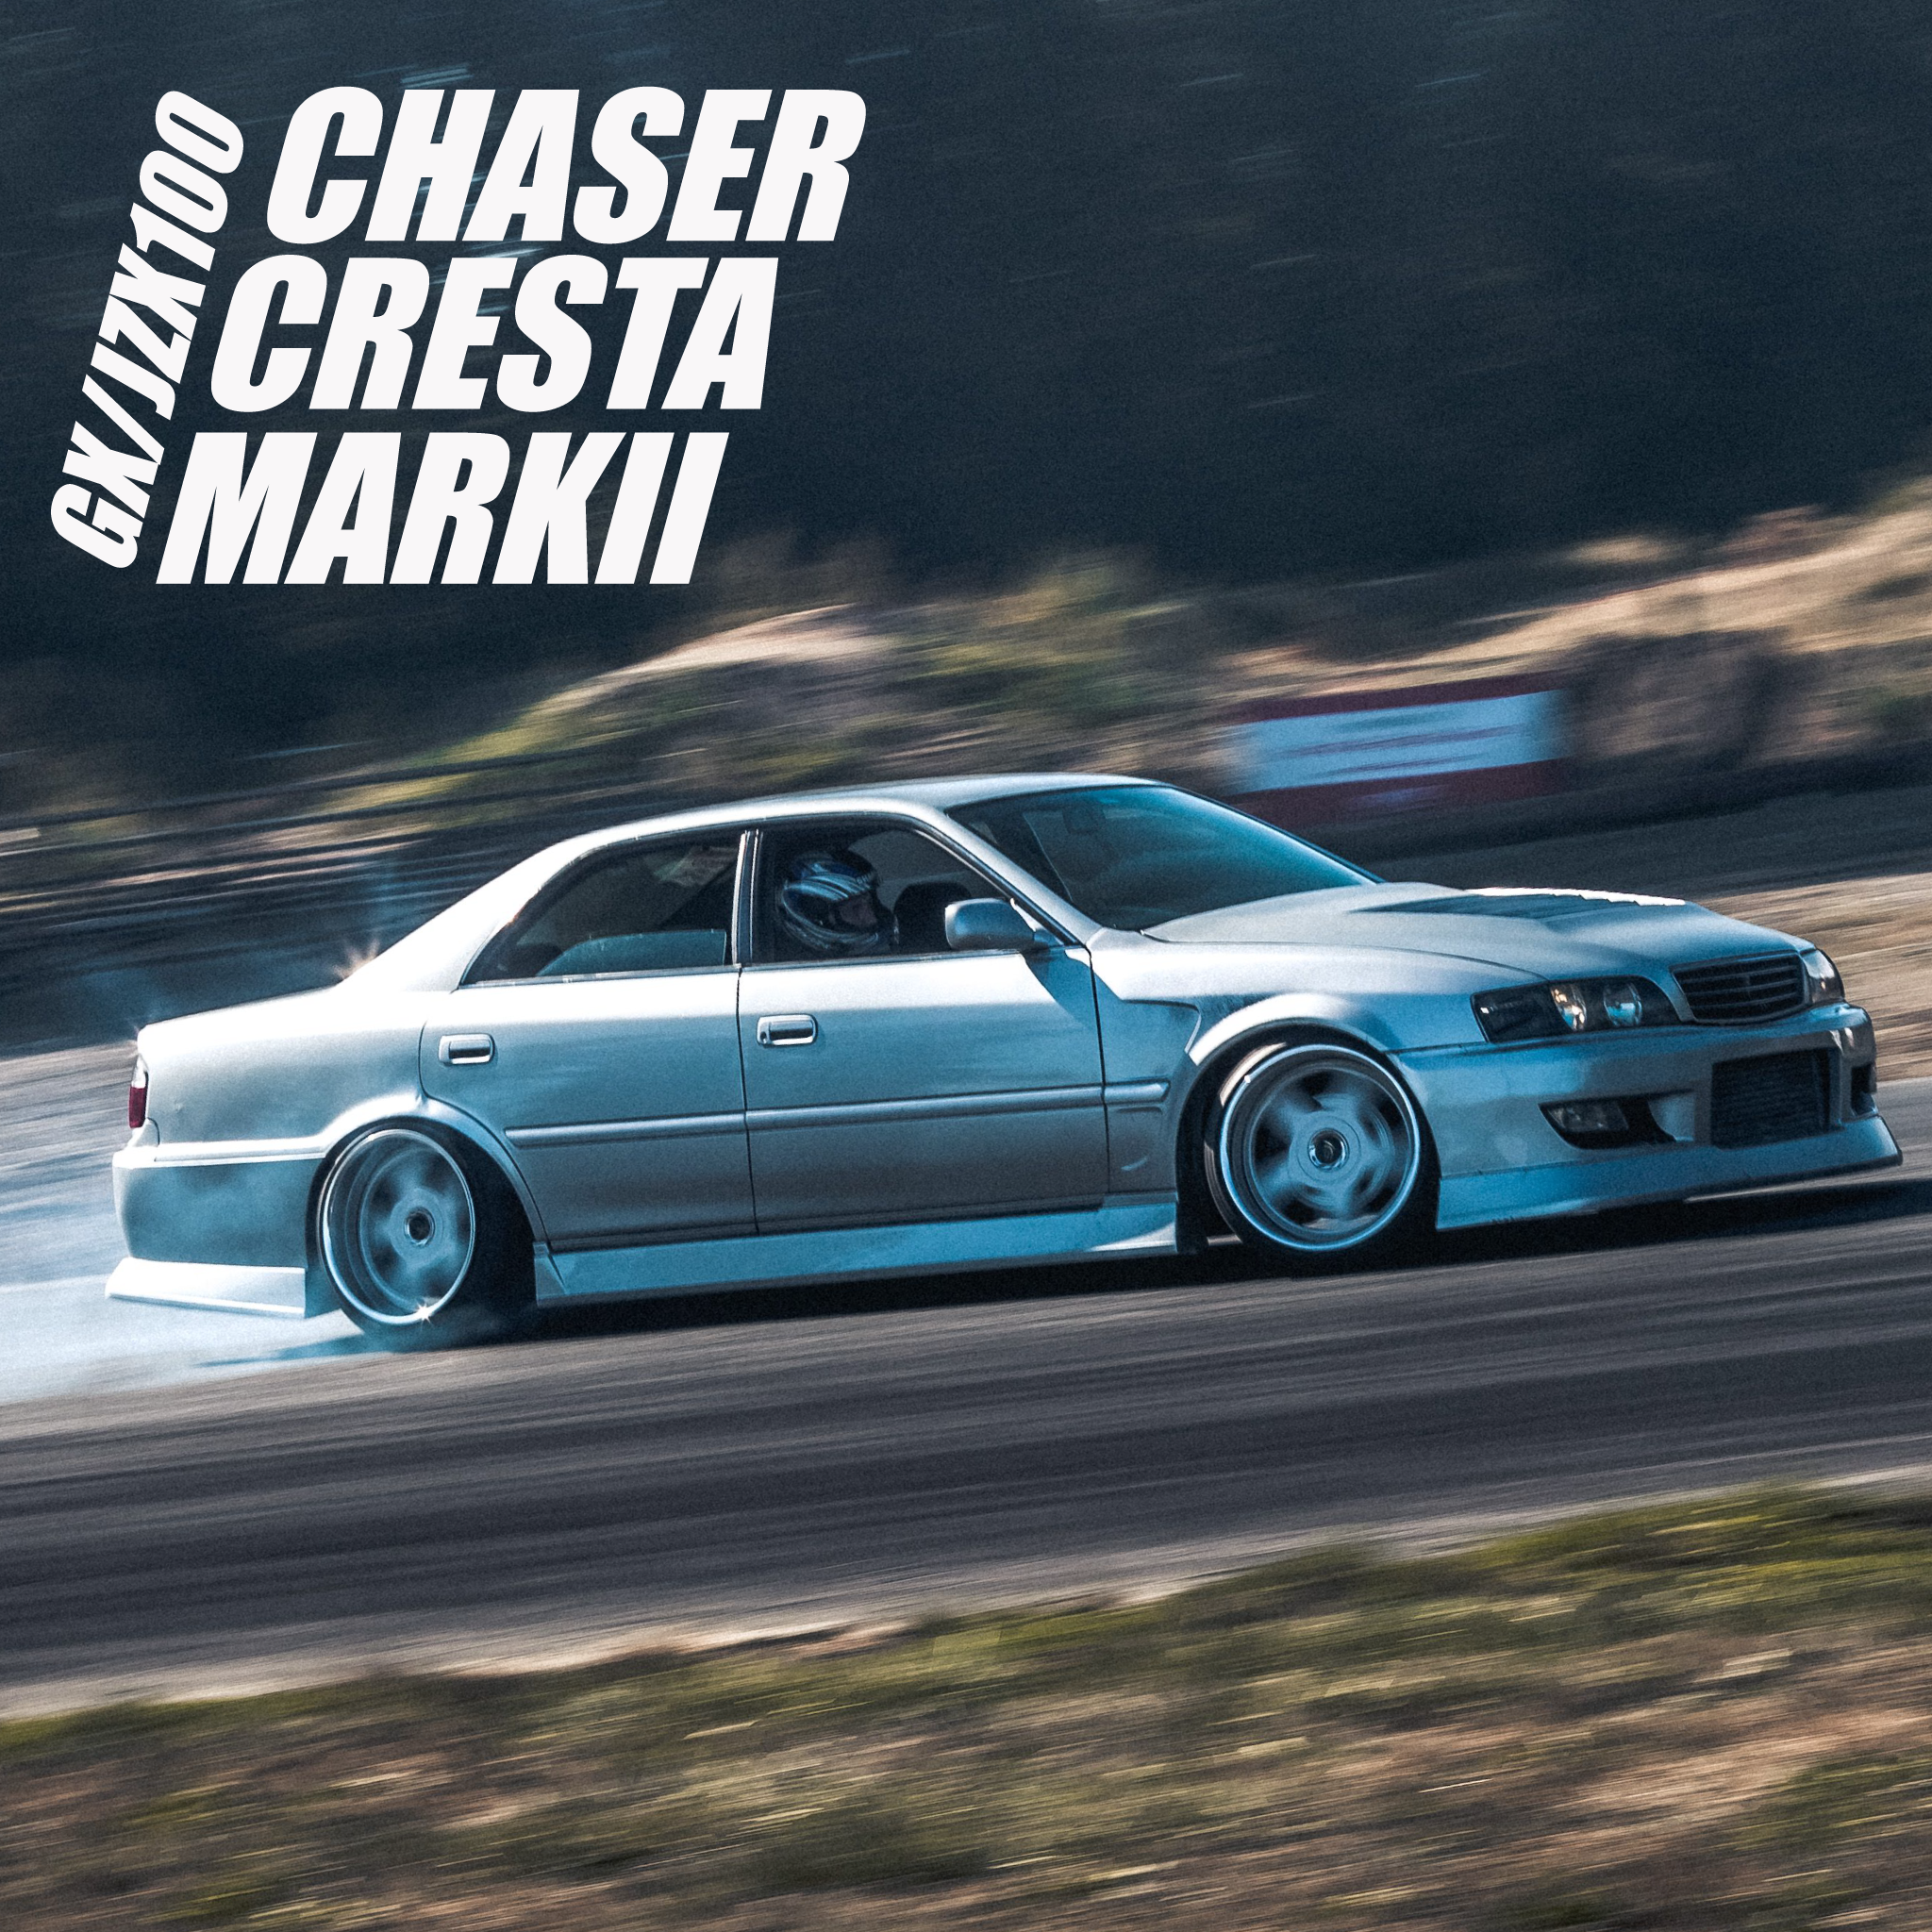 A silver Chaser, Cresta, or Mark II drifting on a track, prominently displayed with 'CHASER CRESTA MARKII' in bold white text above the car, emphasizing its dynamic performance and sleek design.